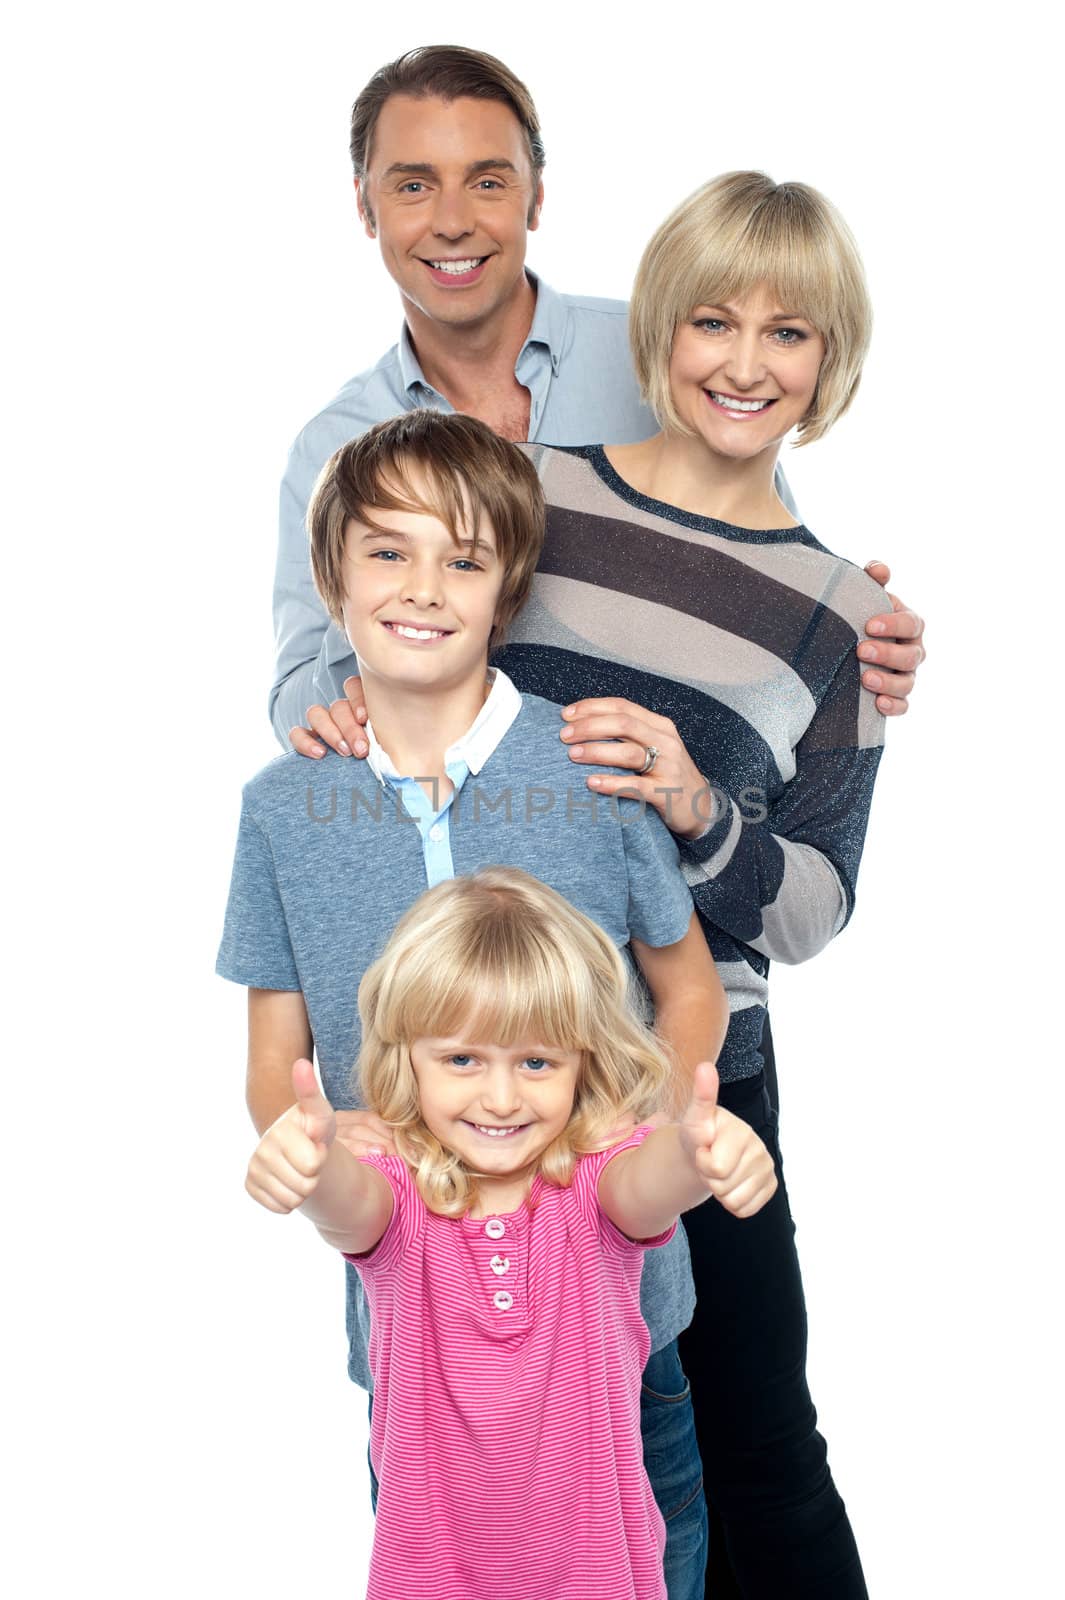 Group portrait of a playful family of four. Smiling heartily